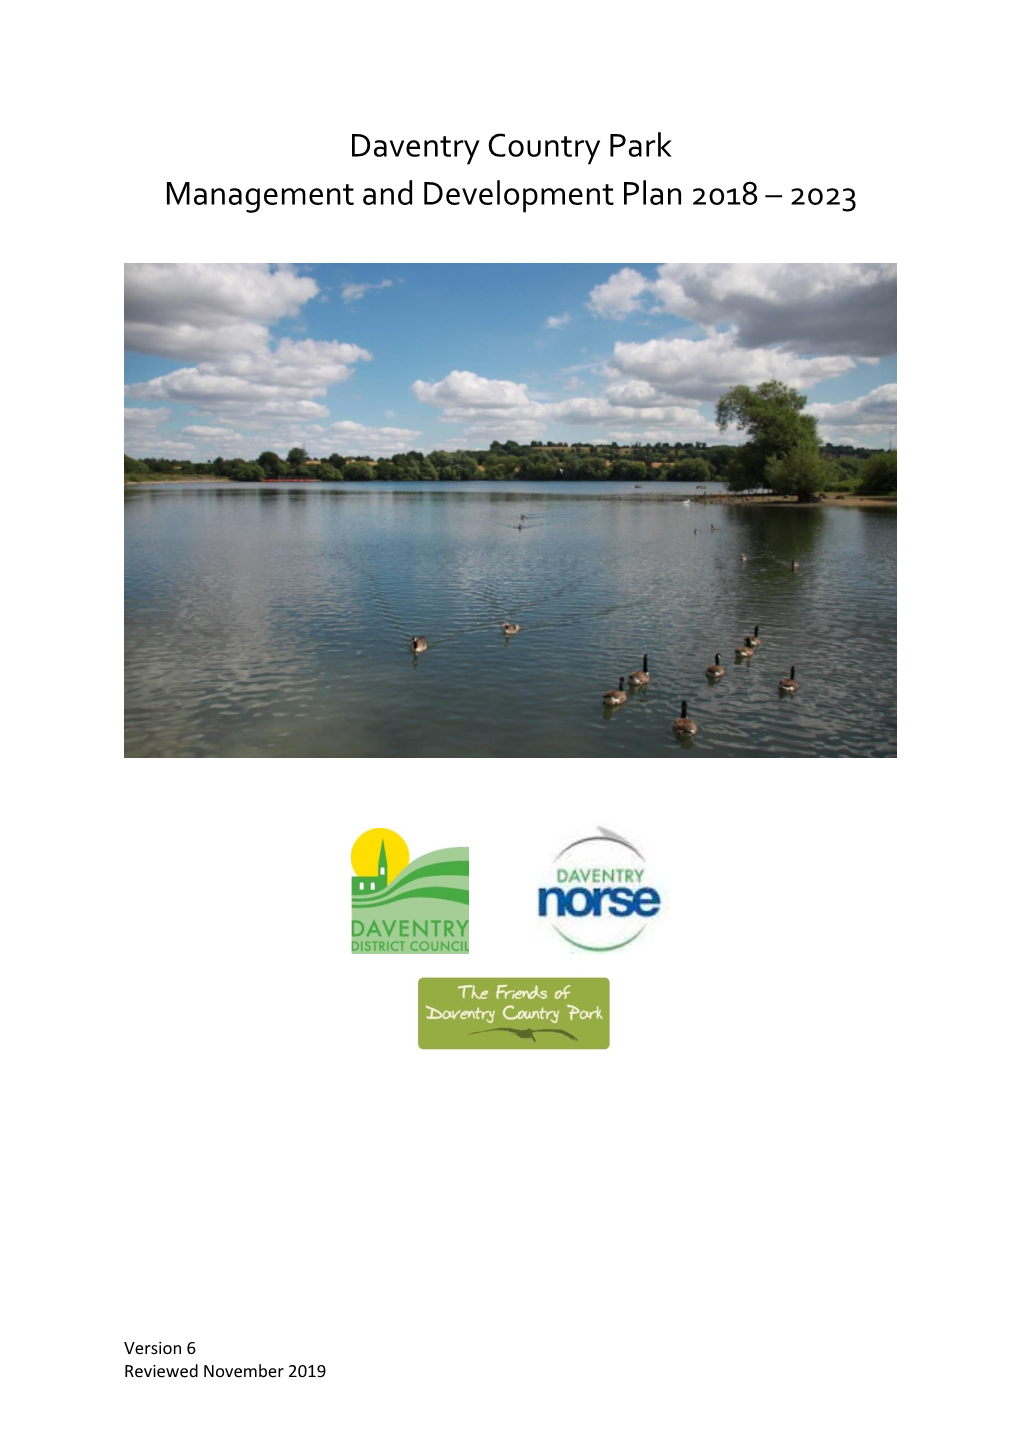 Daventry Country Park Management and Development Plan 2018 – 2023